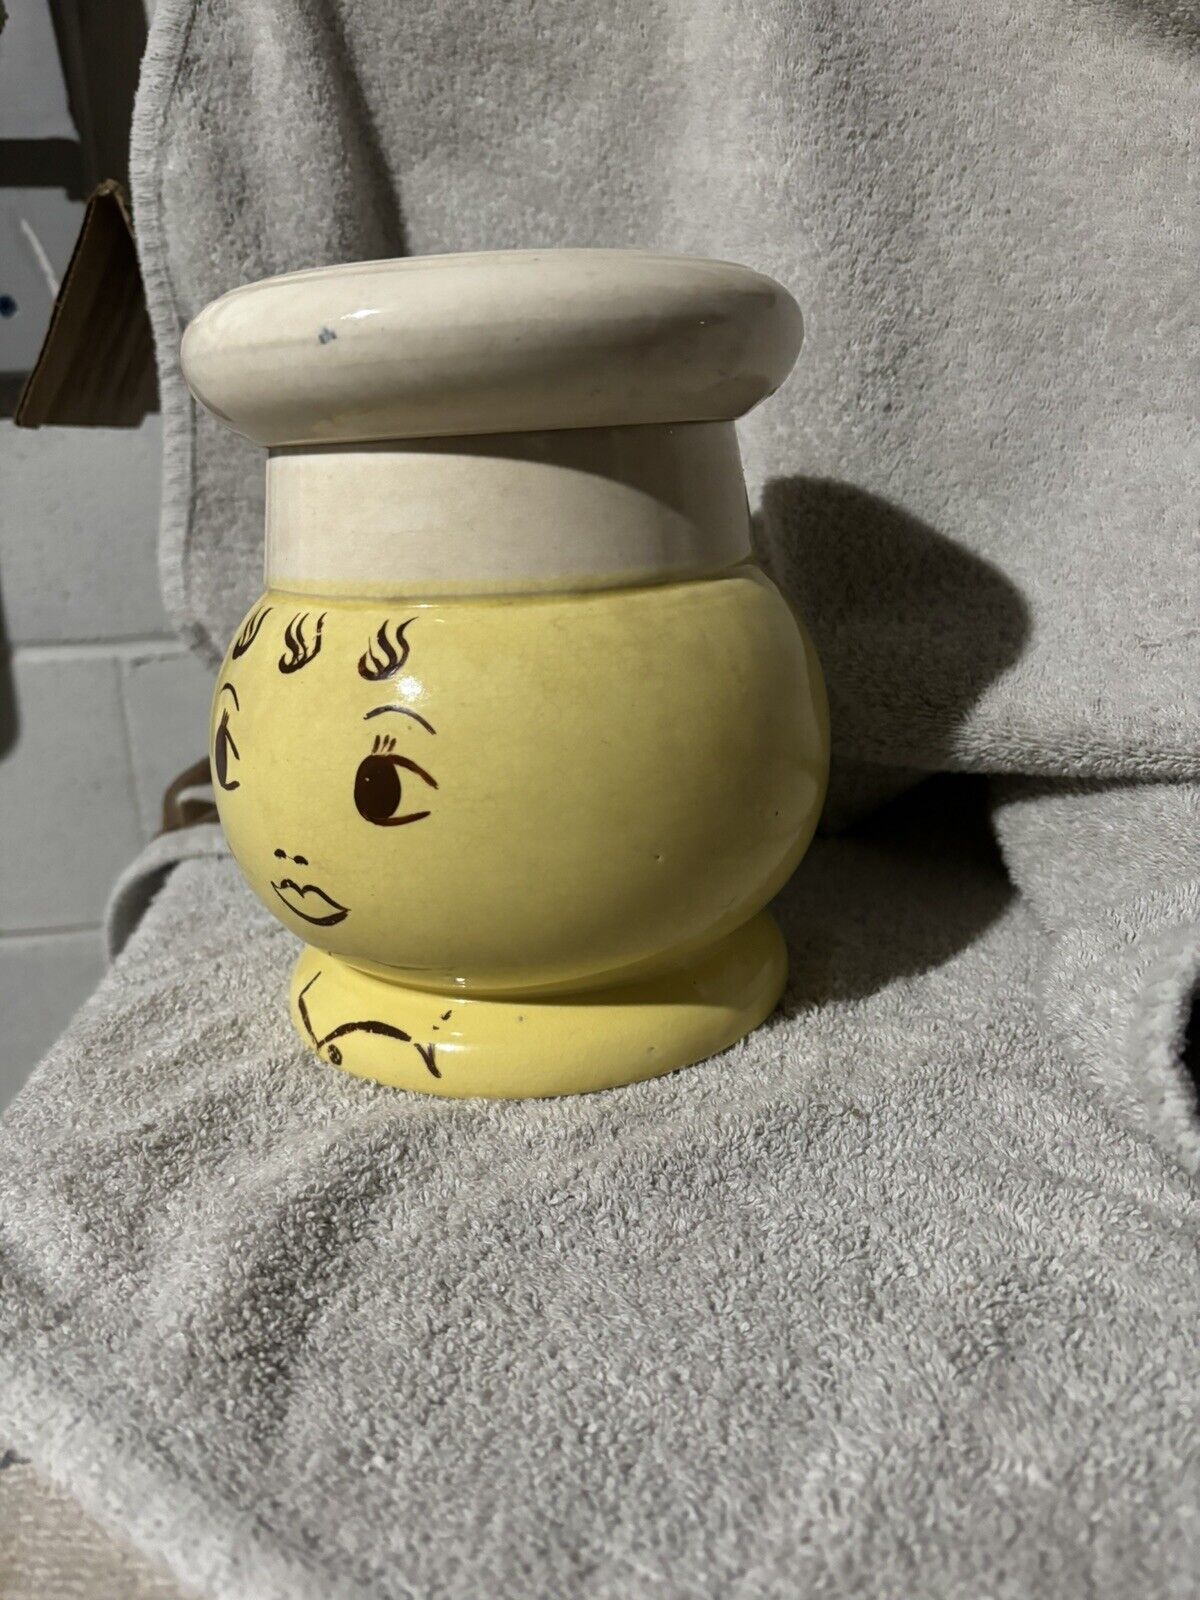 Vintage CHEF COOKIE JAR YELLOW WHITE HAT SMILEY FACE FRENCH